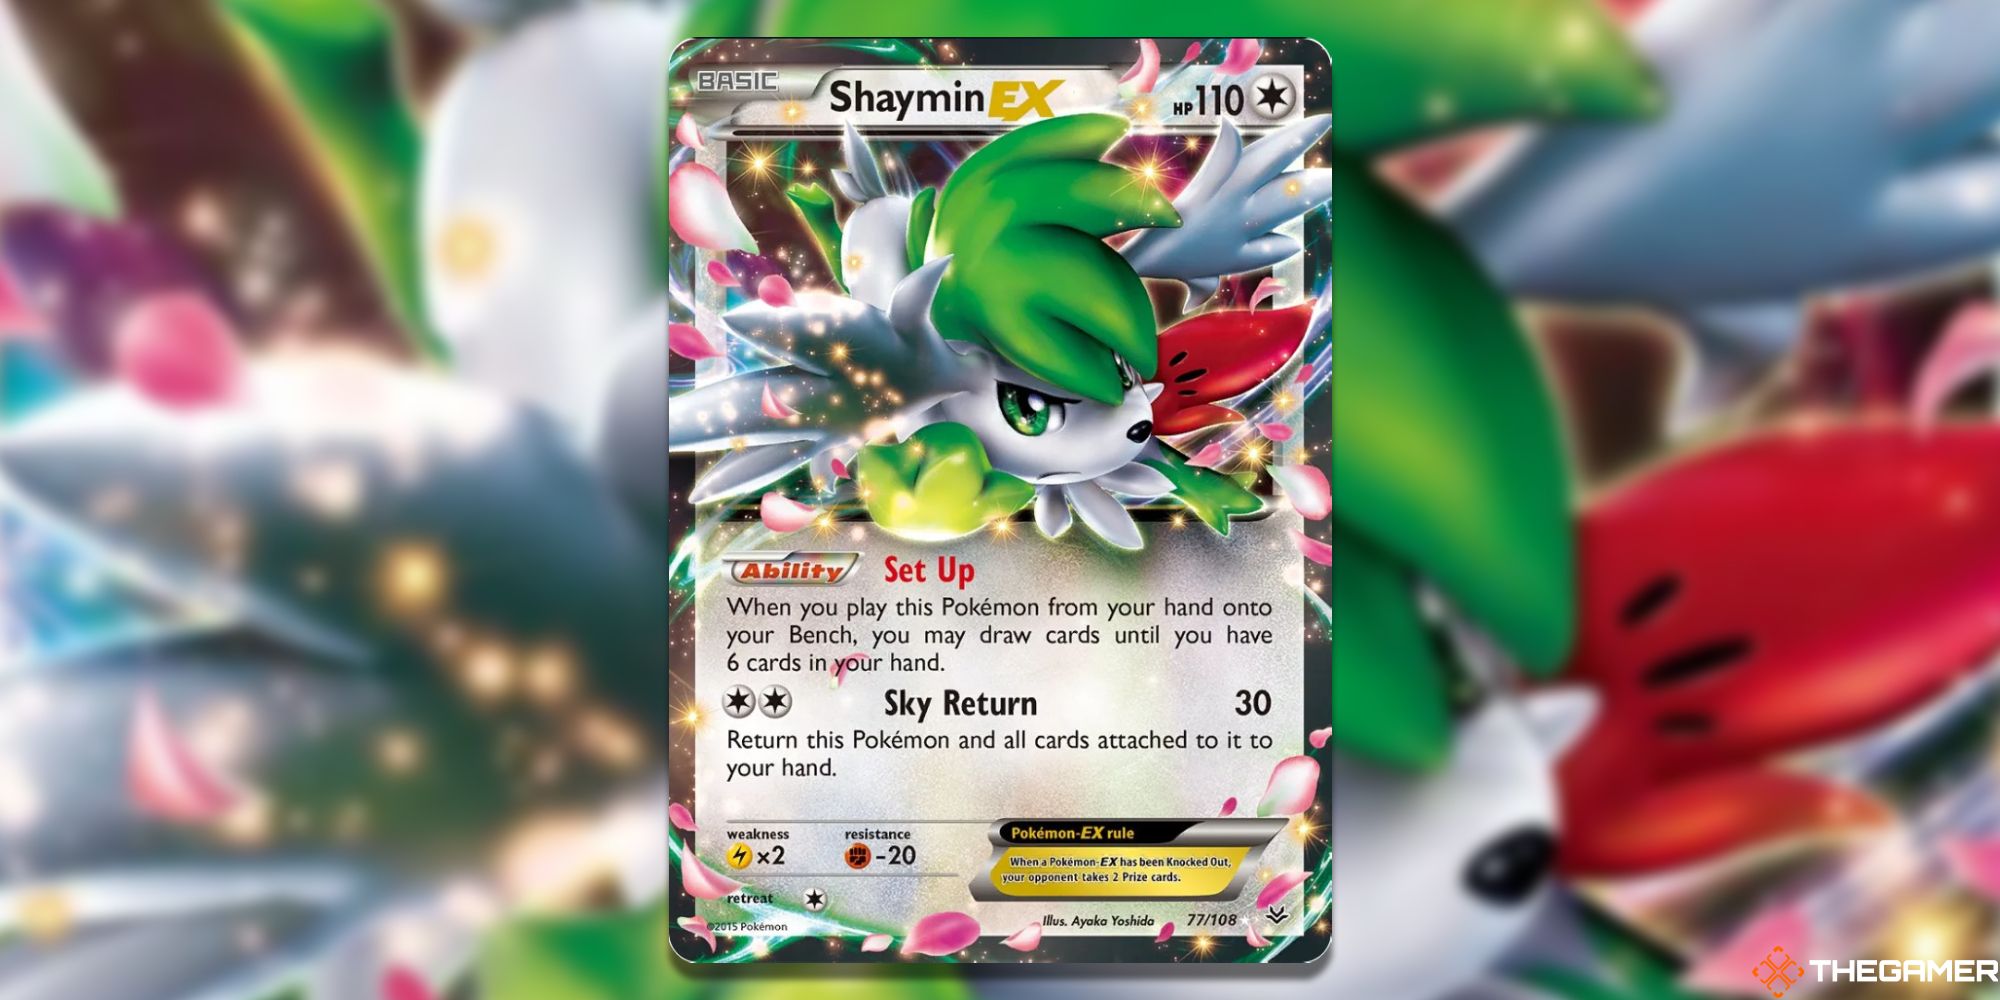 Shaymin-EX from Roaring Skies Card Art with blurred background